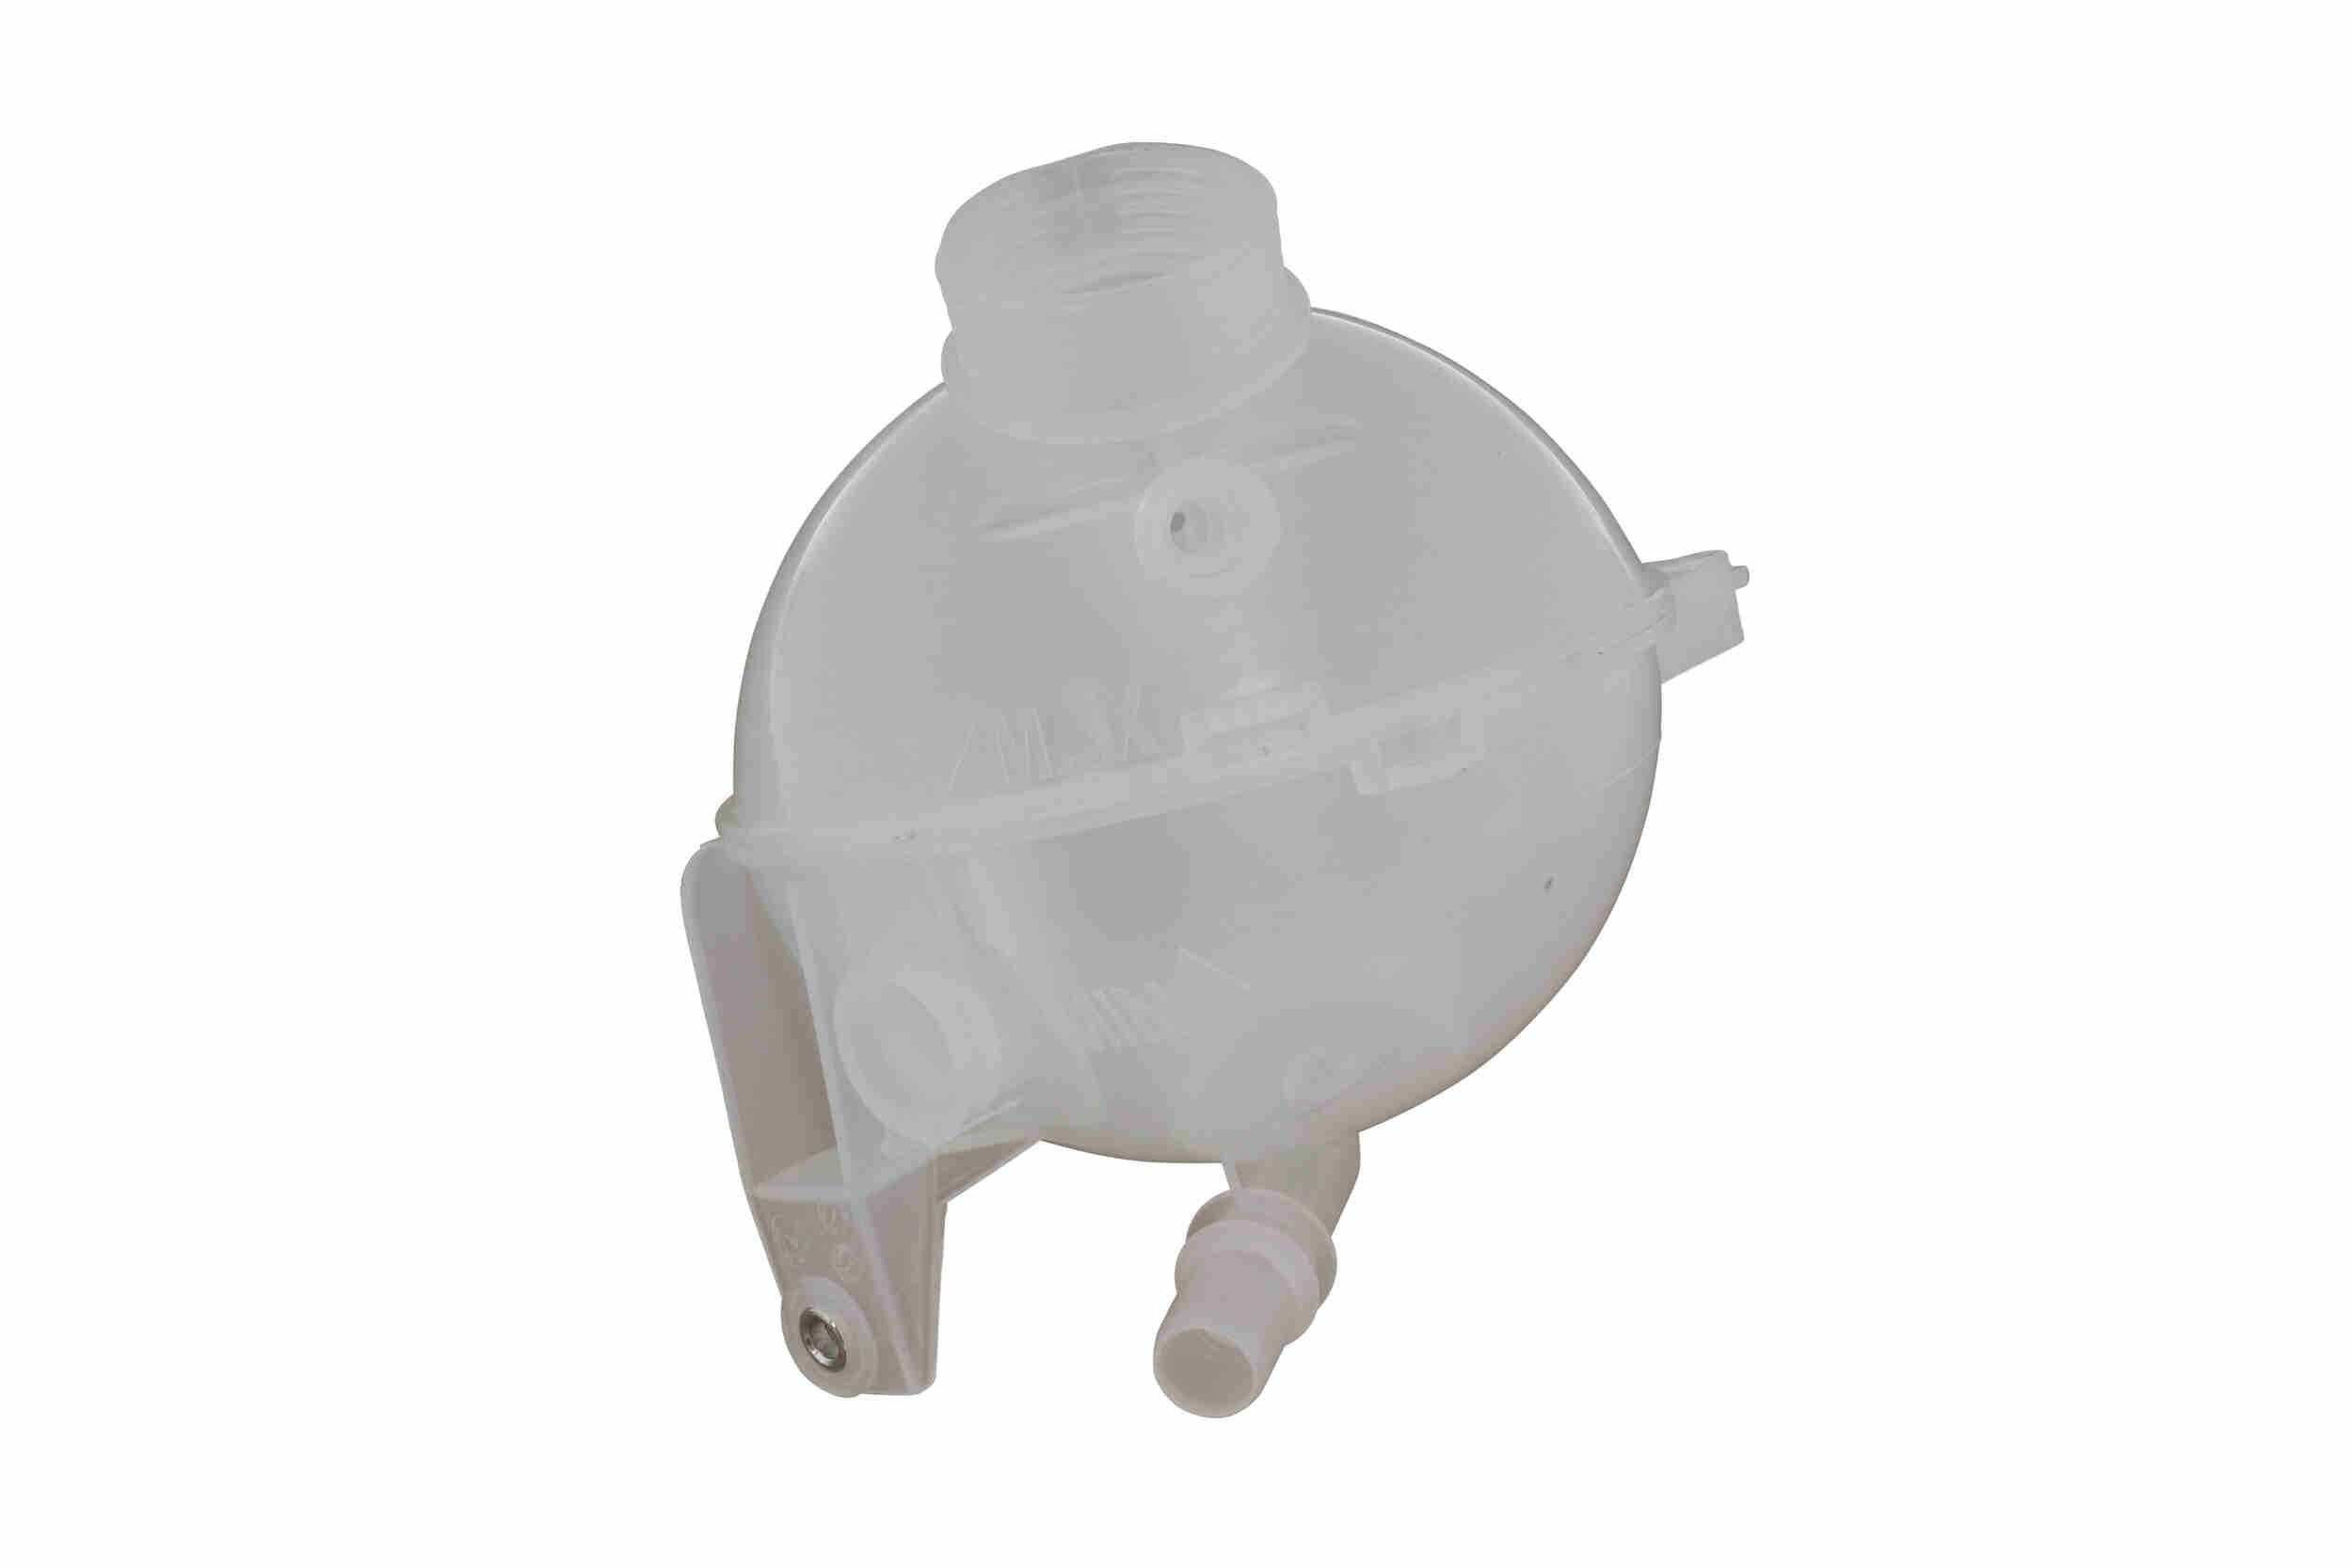 Opel VECTRA Coolant expansion tank 18758151 VAICO V22-1119 online buy